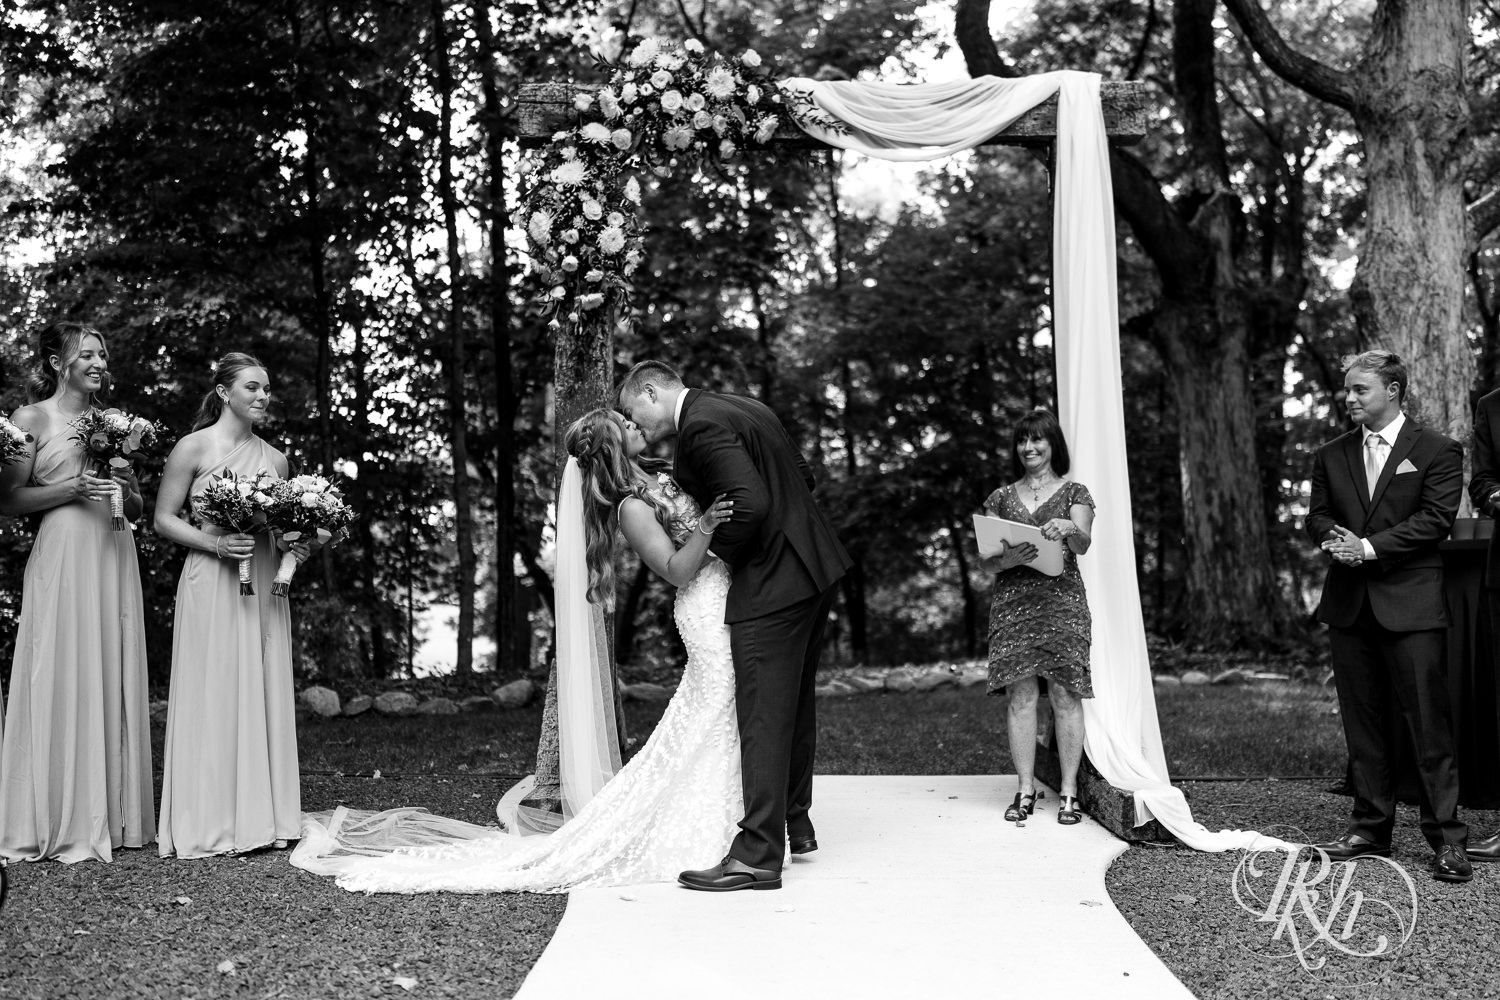 Bride and groom kiss during wedding ceremony on wedding day at Ahavah Cottage in Elysian, Minnesota.